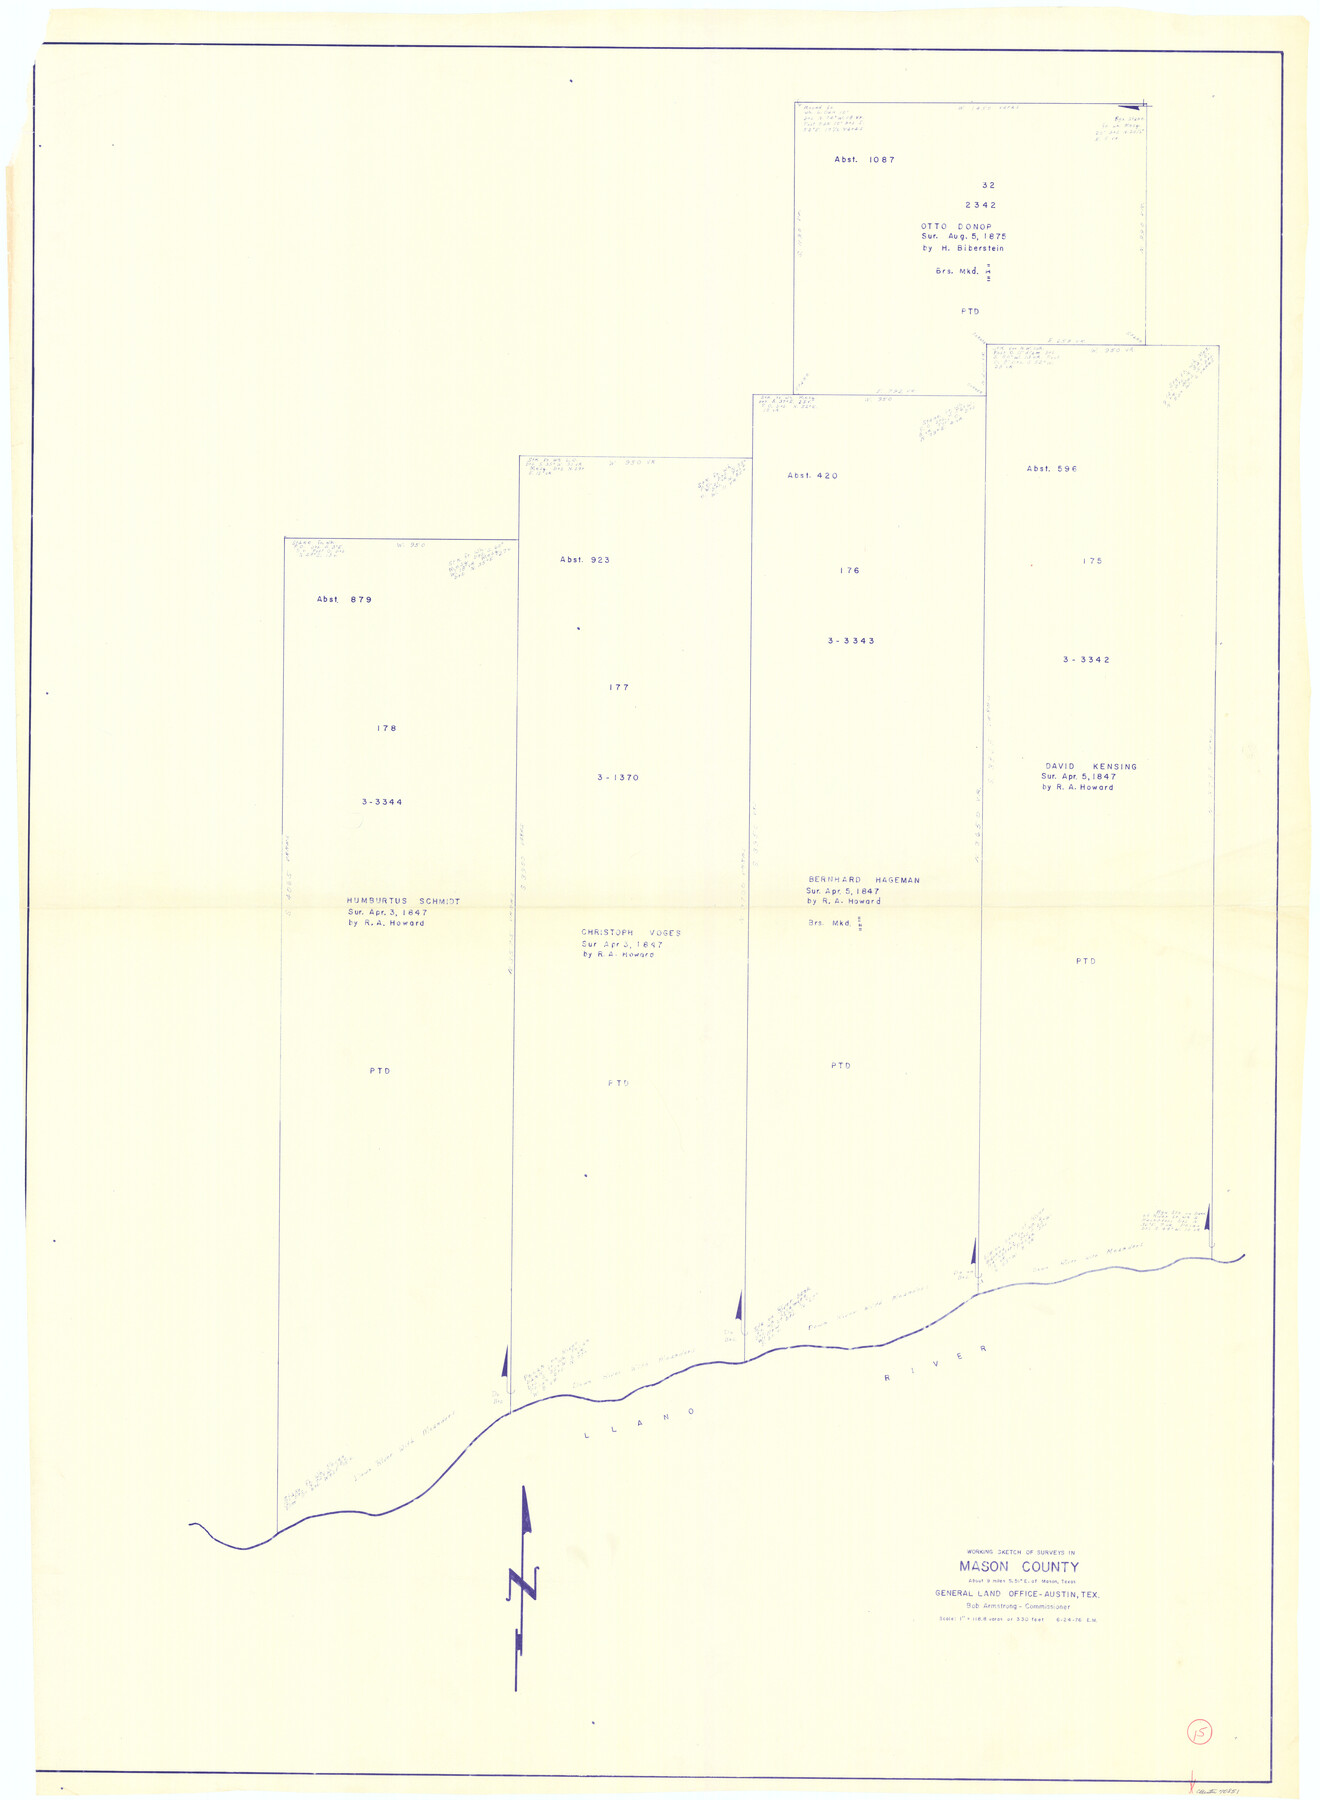 70851, Mason County Working Sketch 15, General Map Collection